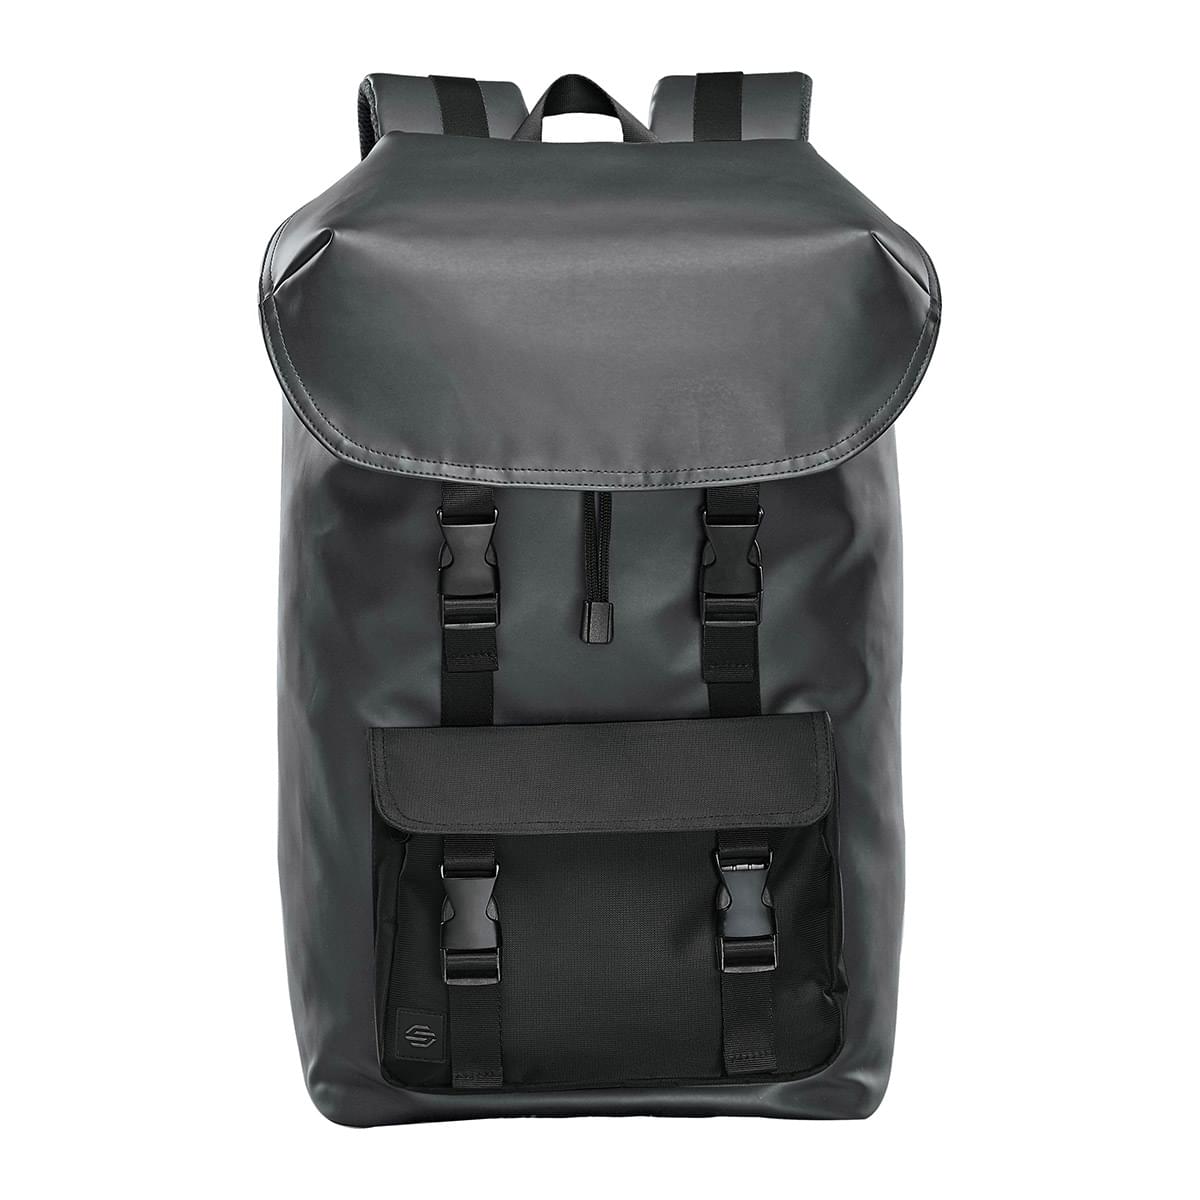 Nomad Backpack Stormtech USA Retail